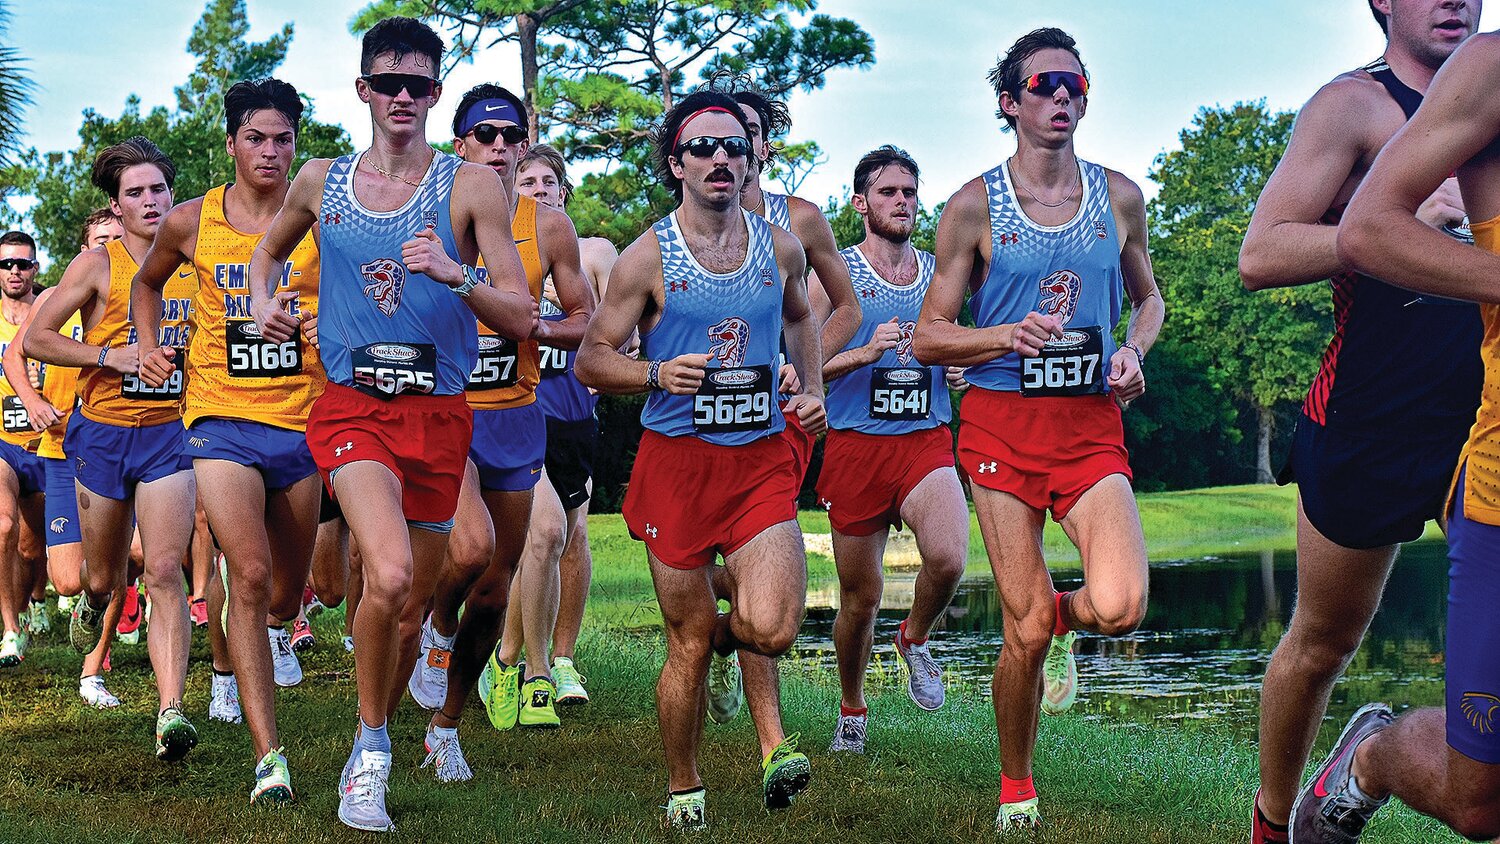 Former Keystone Heights High cross country runner Alex Guy, in center with sunglasses, chased Ridgeview’s Joel Nesi at Mountain Dew Classic in Gainesville.